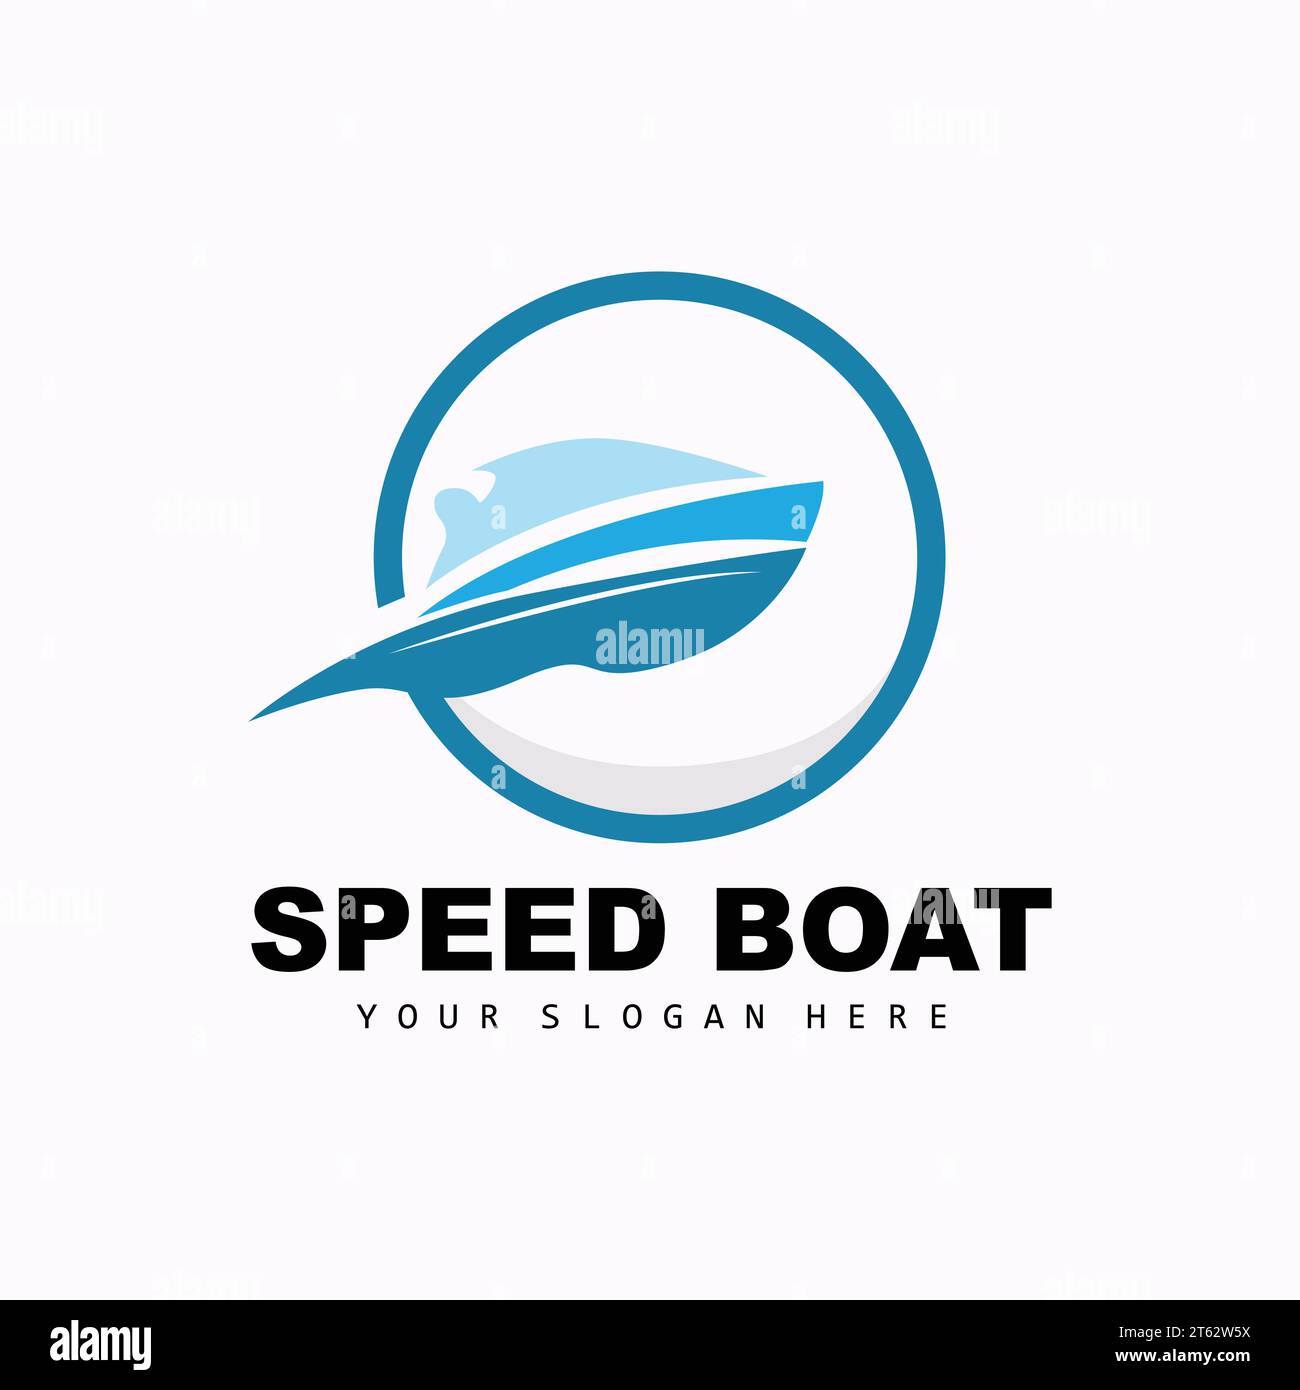 Speed Boat Logo, Fast Cargo Ship Vector, Sailboat, Design For Ship Manufacturing Company, Waterway Shipping, Marine Vehicles, Transportation Stock Vector